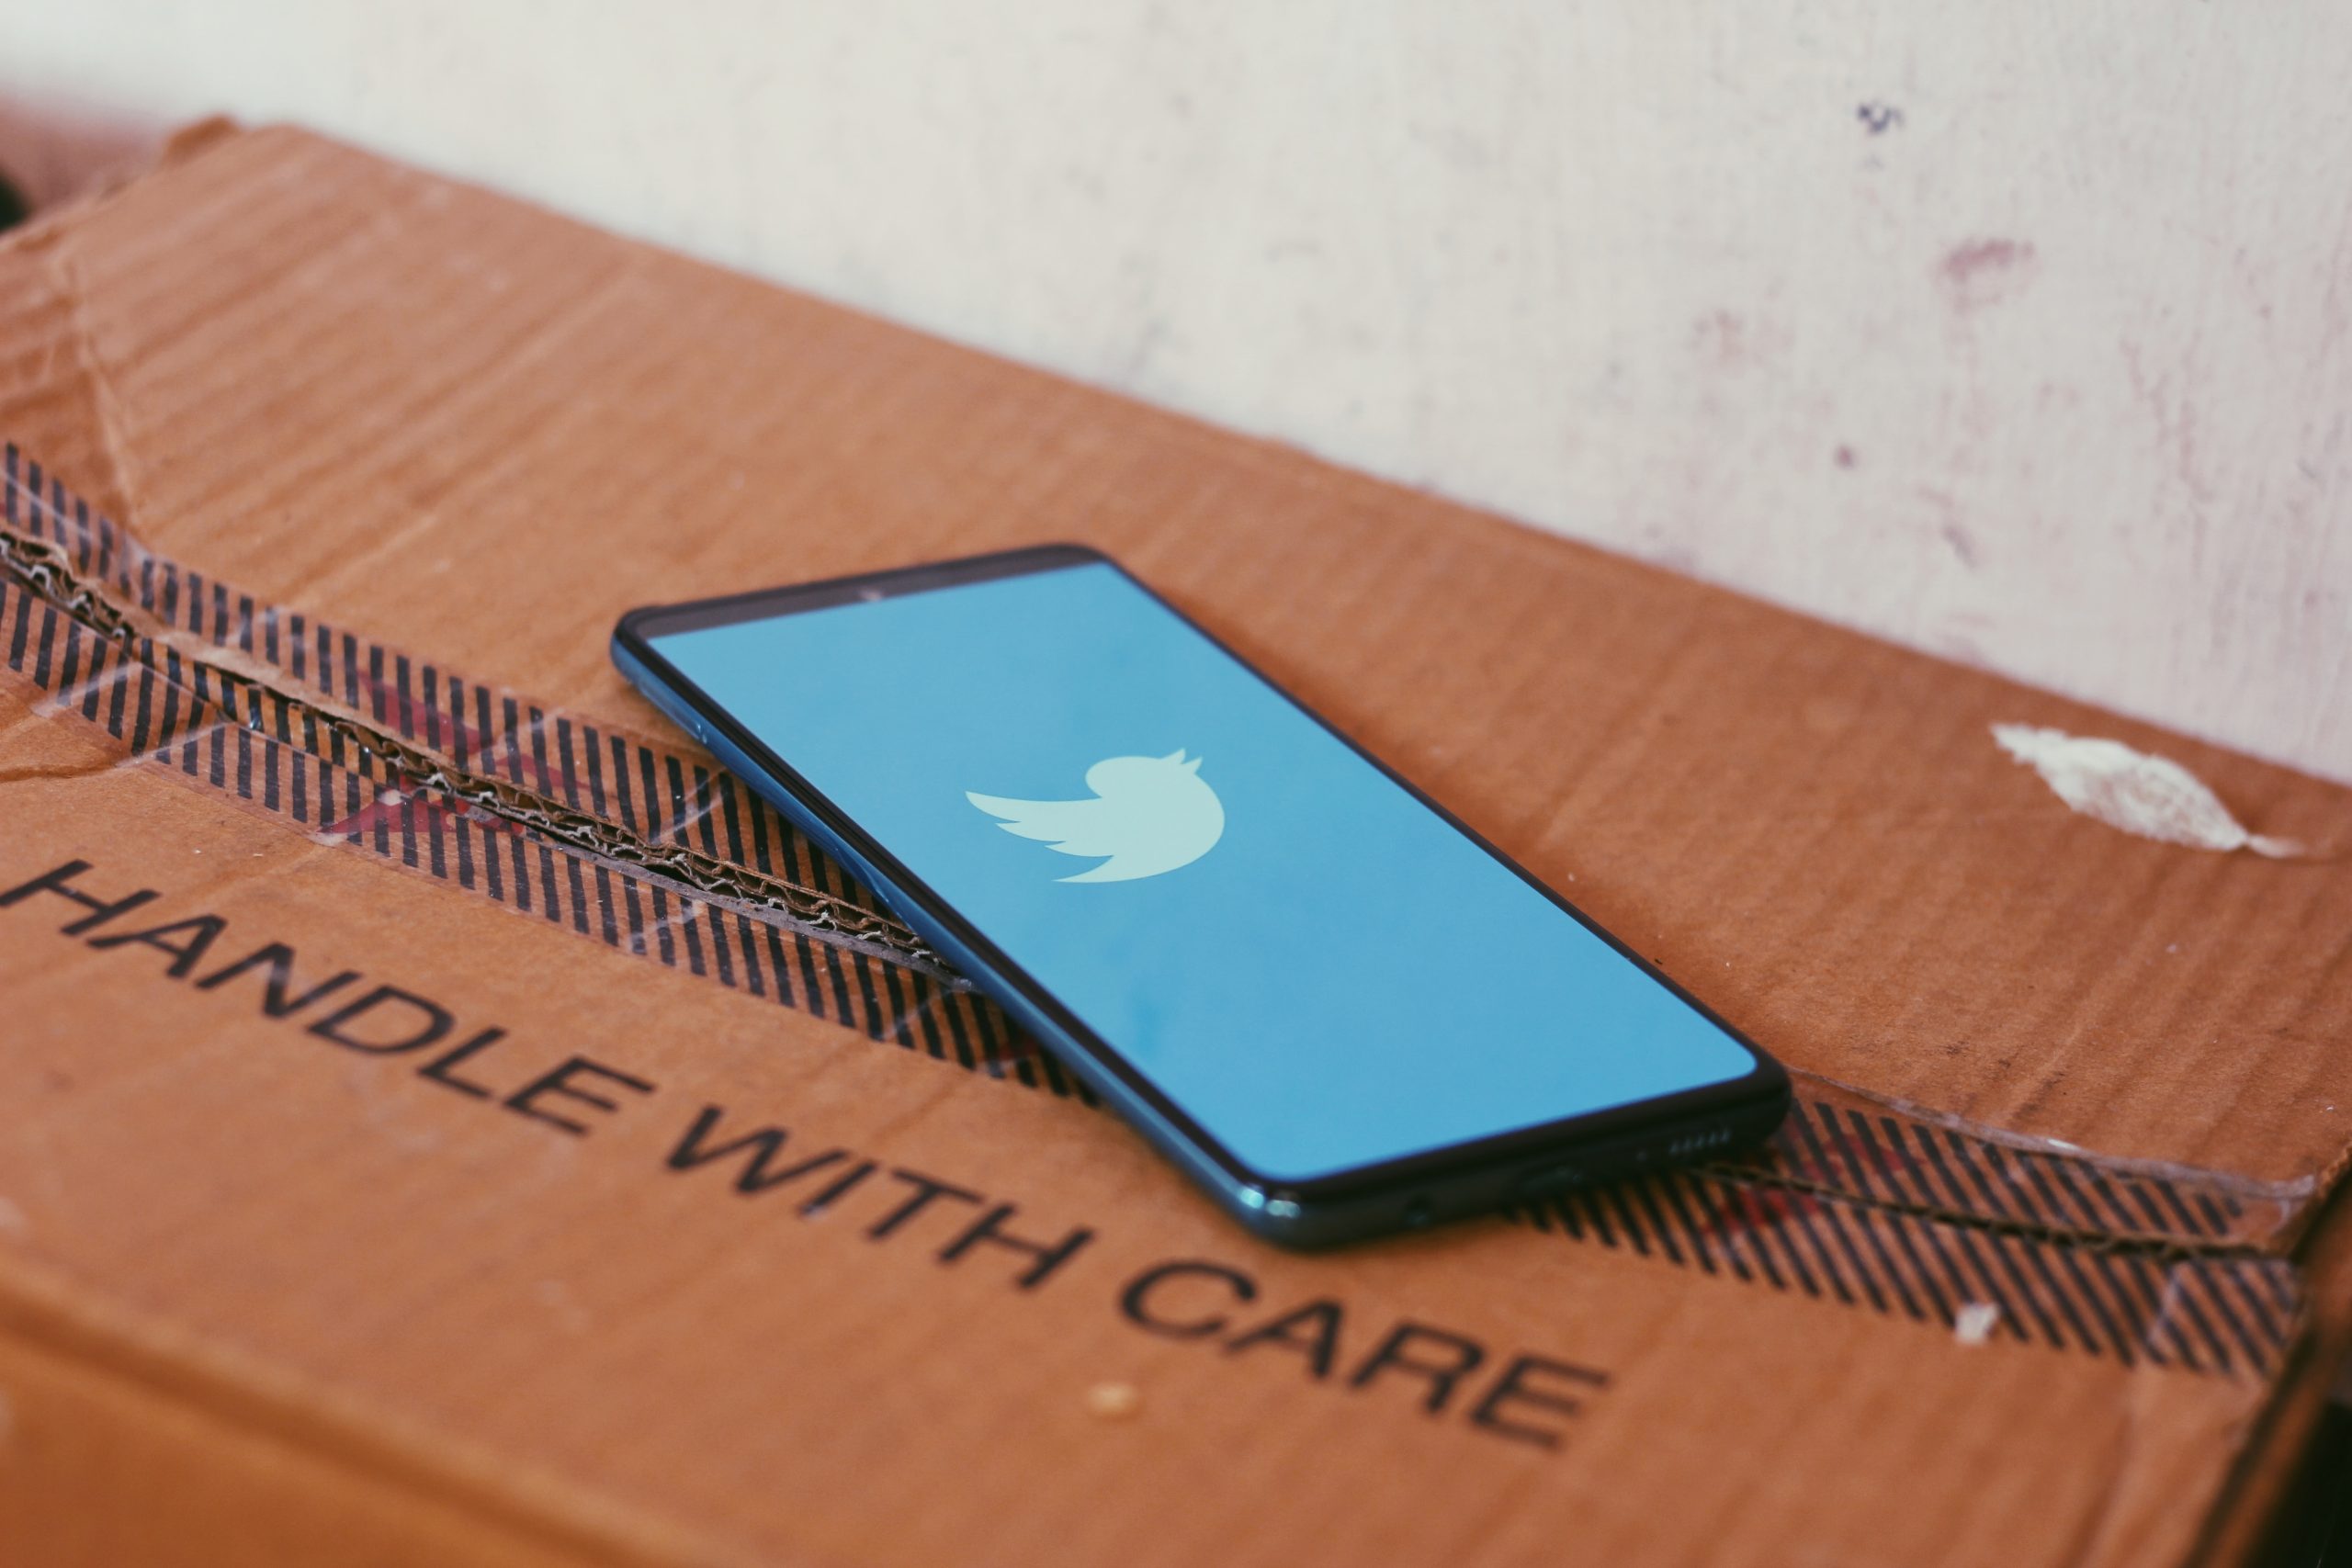 A smartphone lying on a carton that reads ‘Handle with care’ while the phone’s screen has twitter’s symbol.